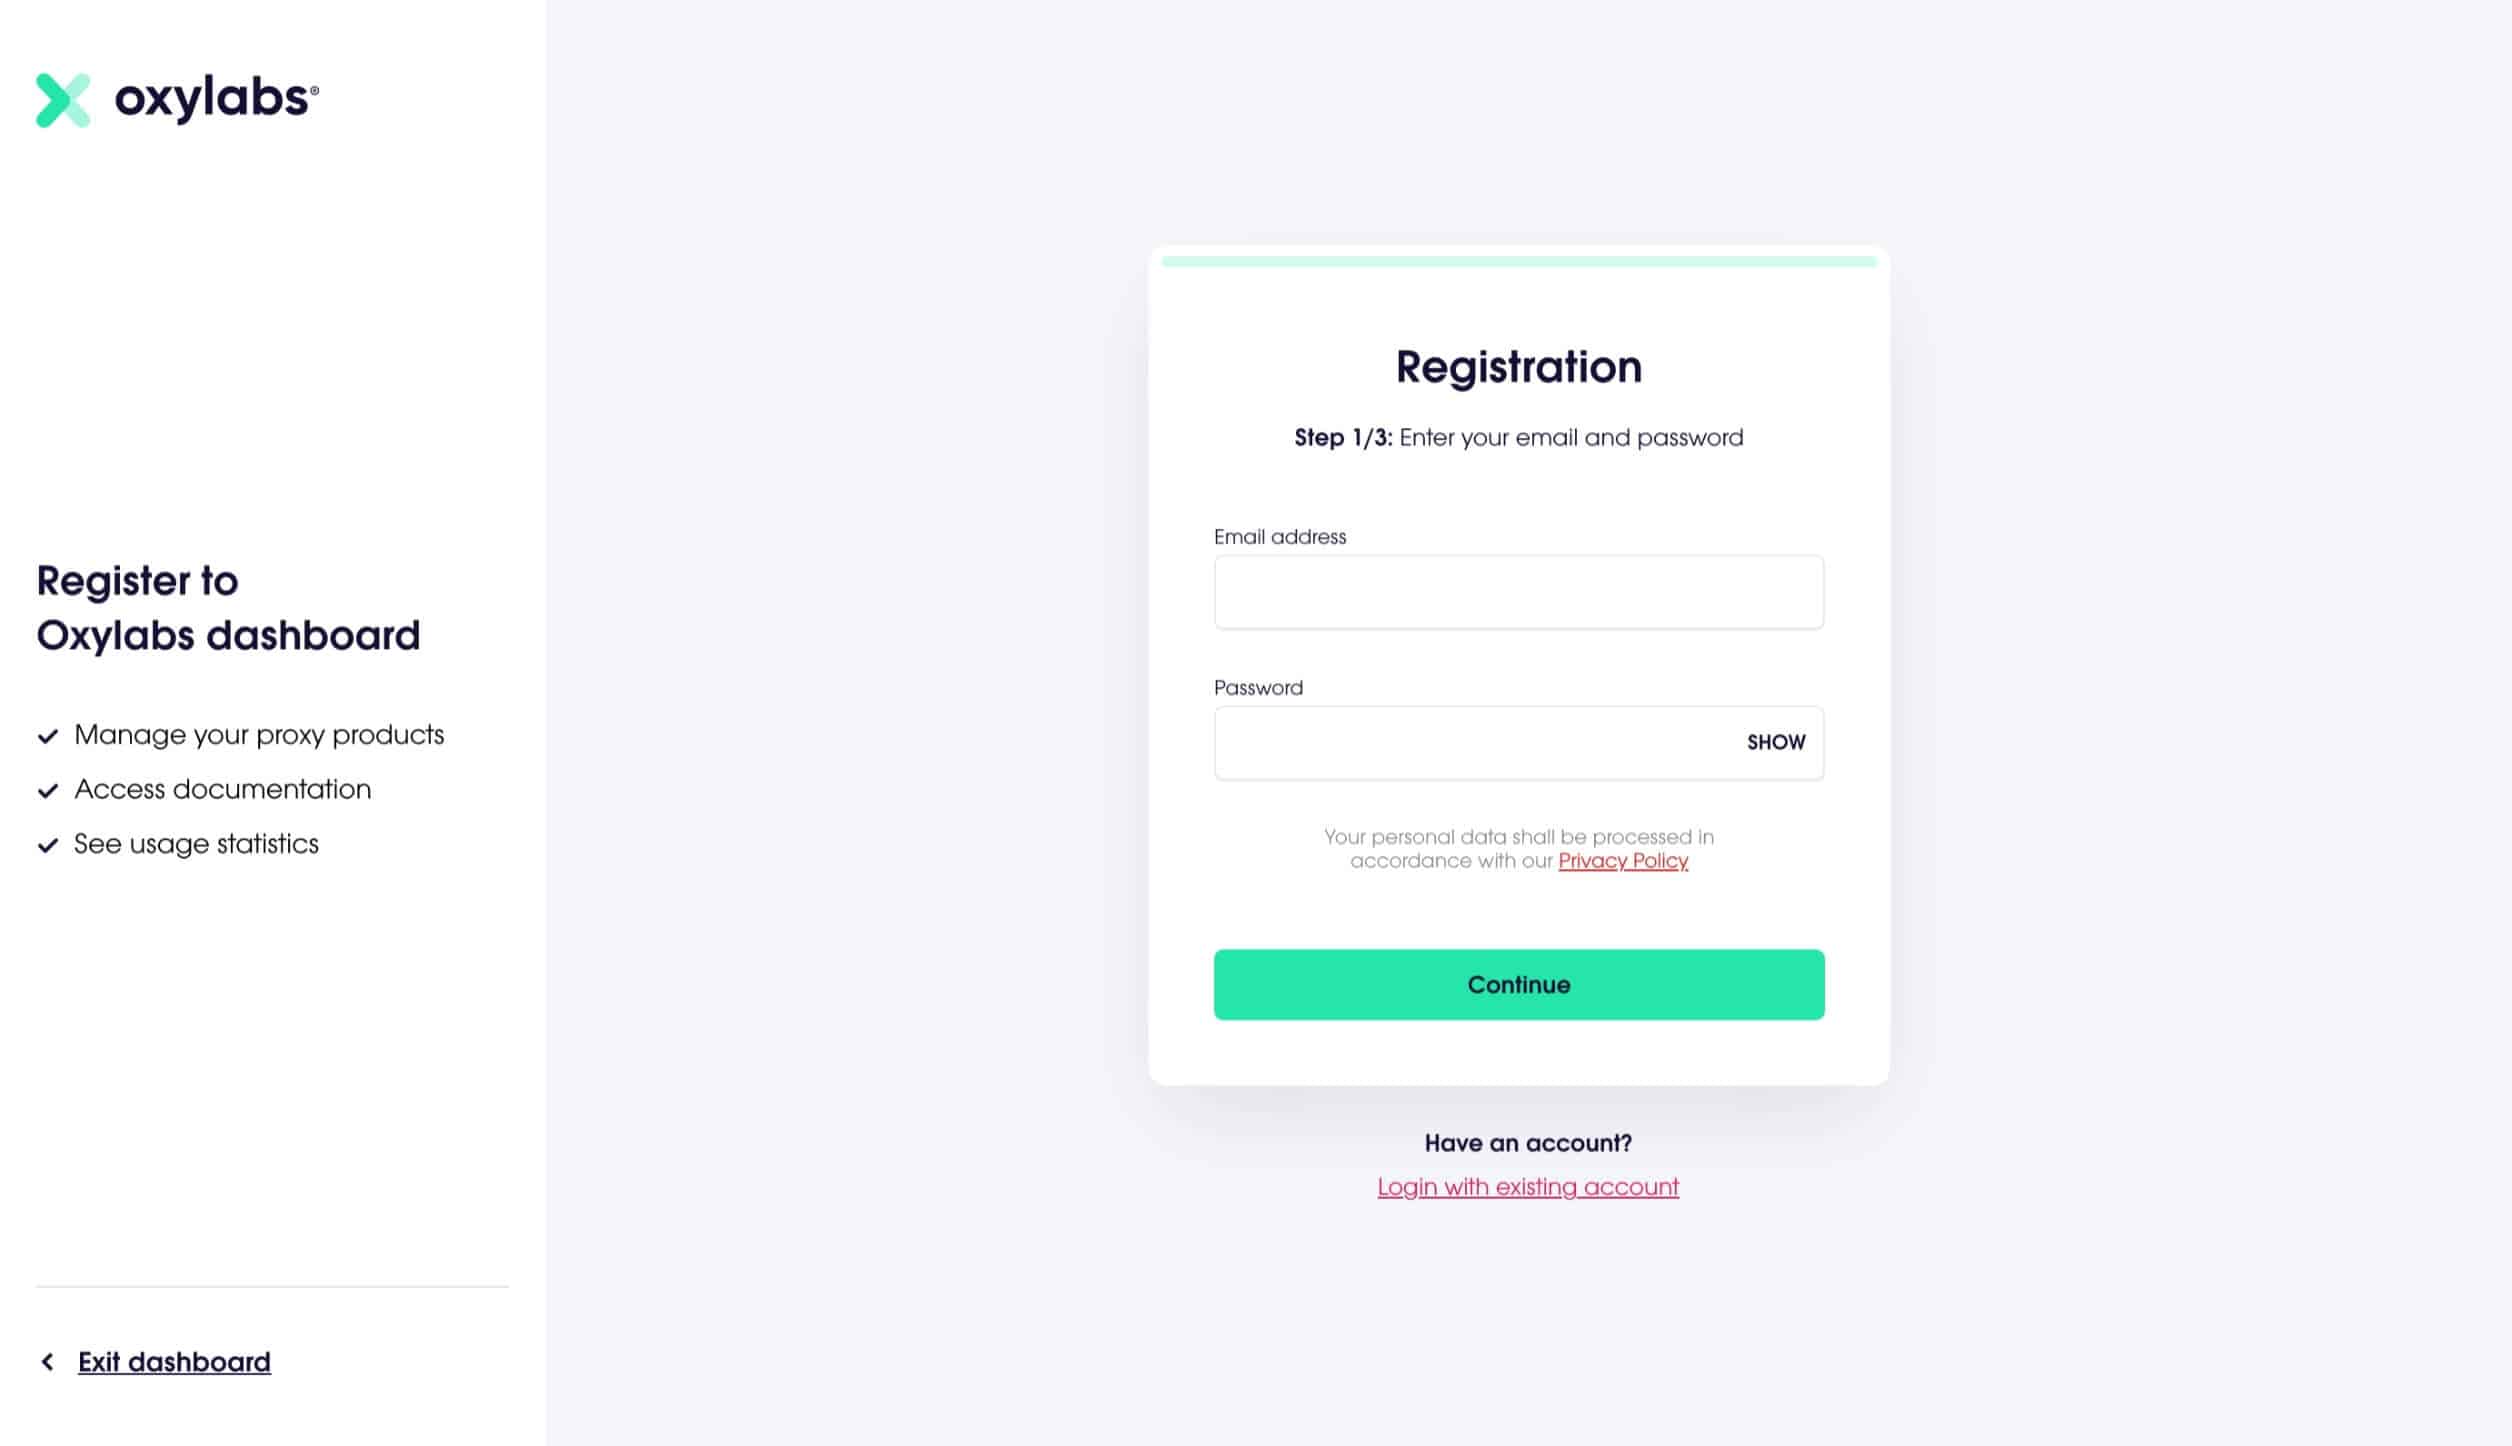 oxylabs registration page